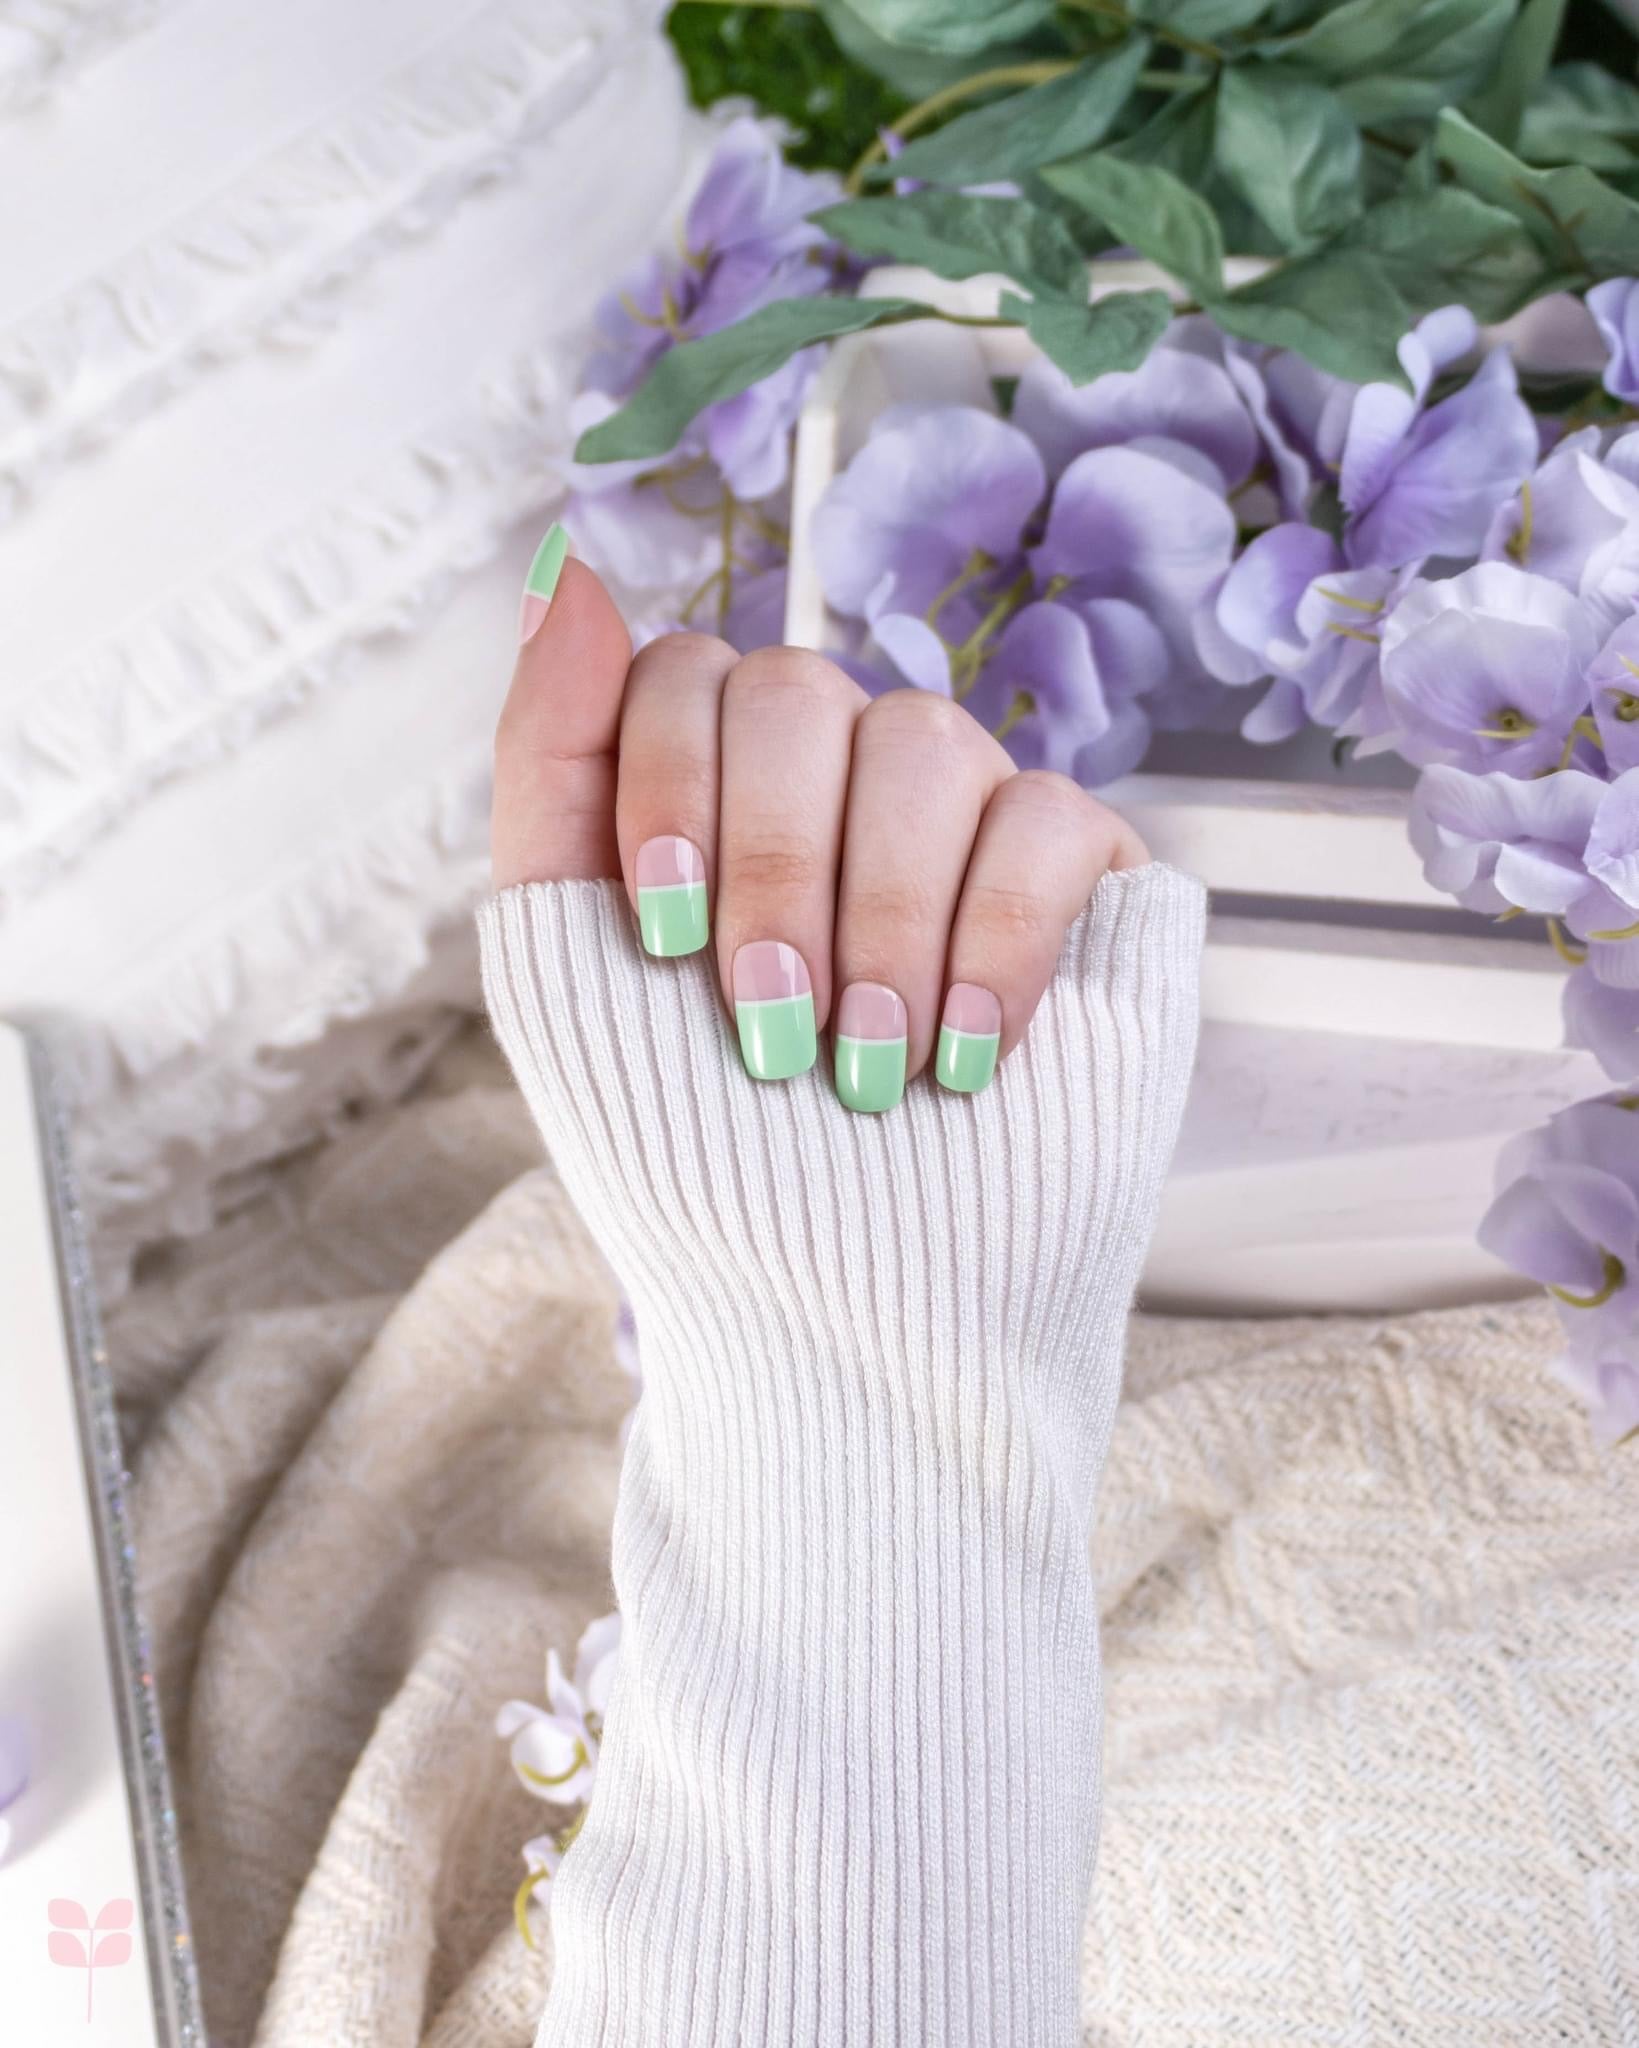 Manicured nails with light green tips